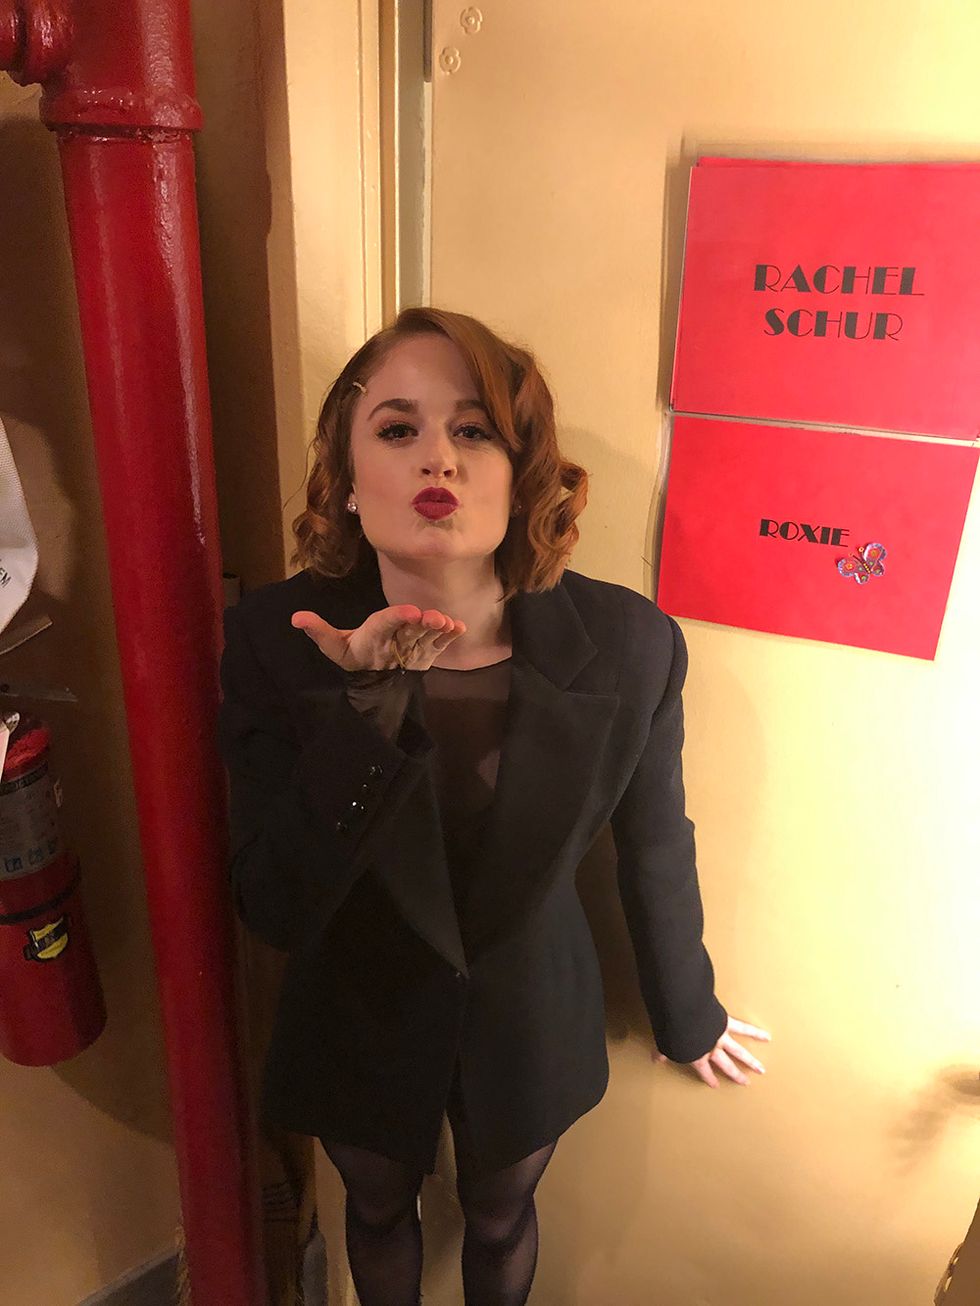 Schur standing in front of her dressing room door, which has a sign with her name on it and another sign that says "Roxie." She is wearing all black, has stage makeup on, and blows a kiss at the camera.